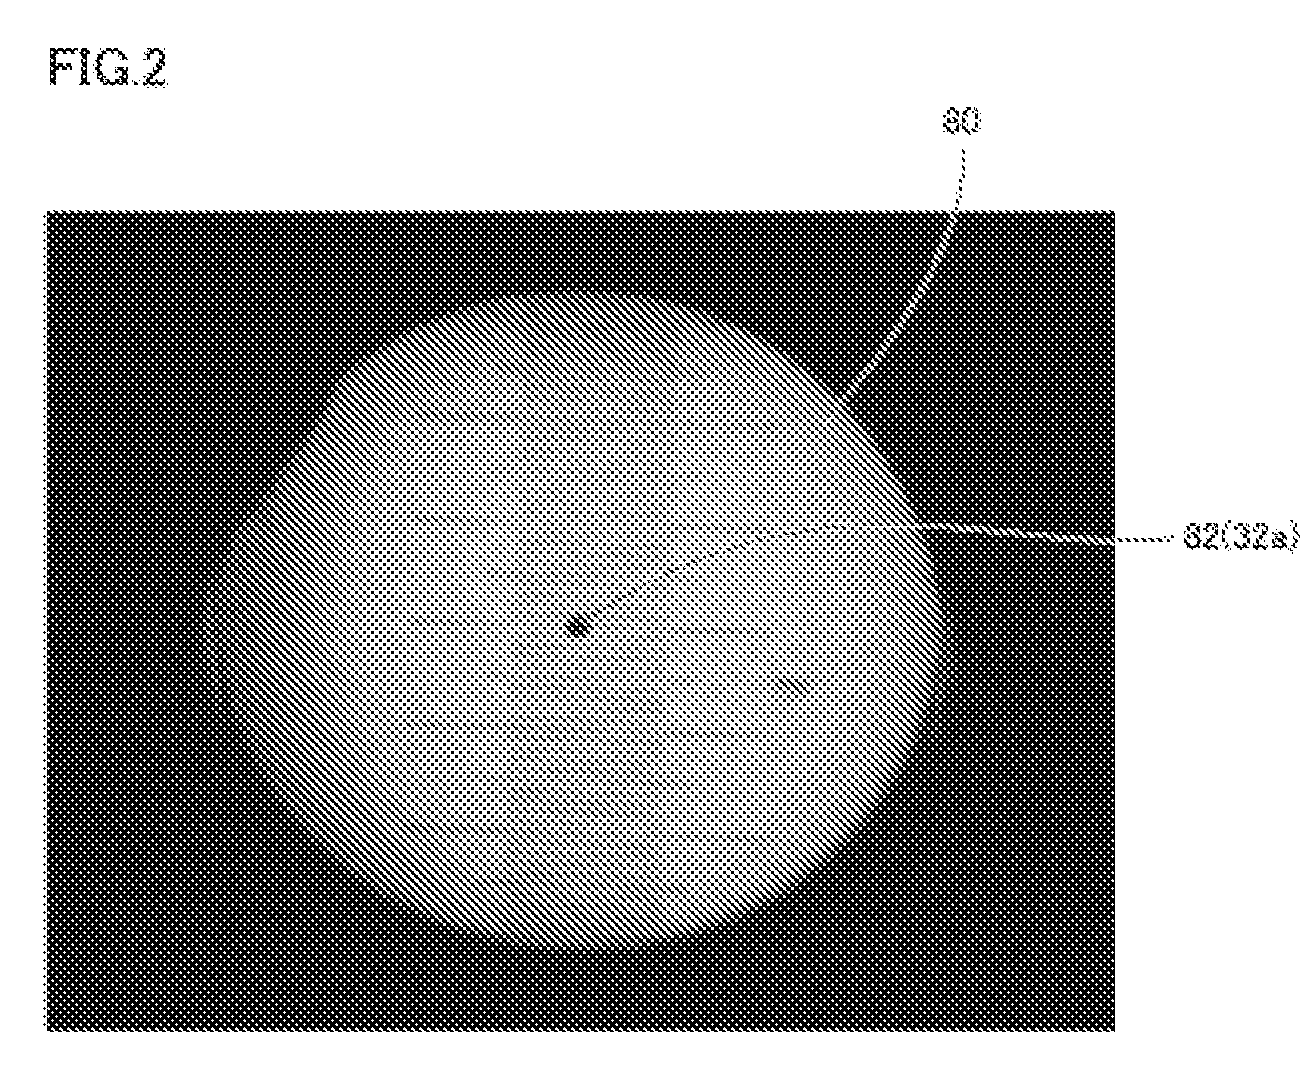 Optical characteristic measuring apparatus and measuring method using light reflected from object to be measured